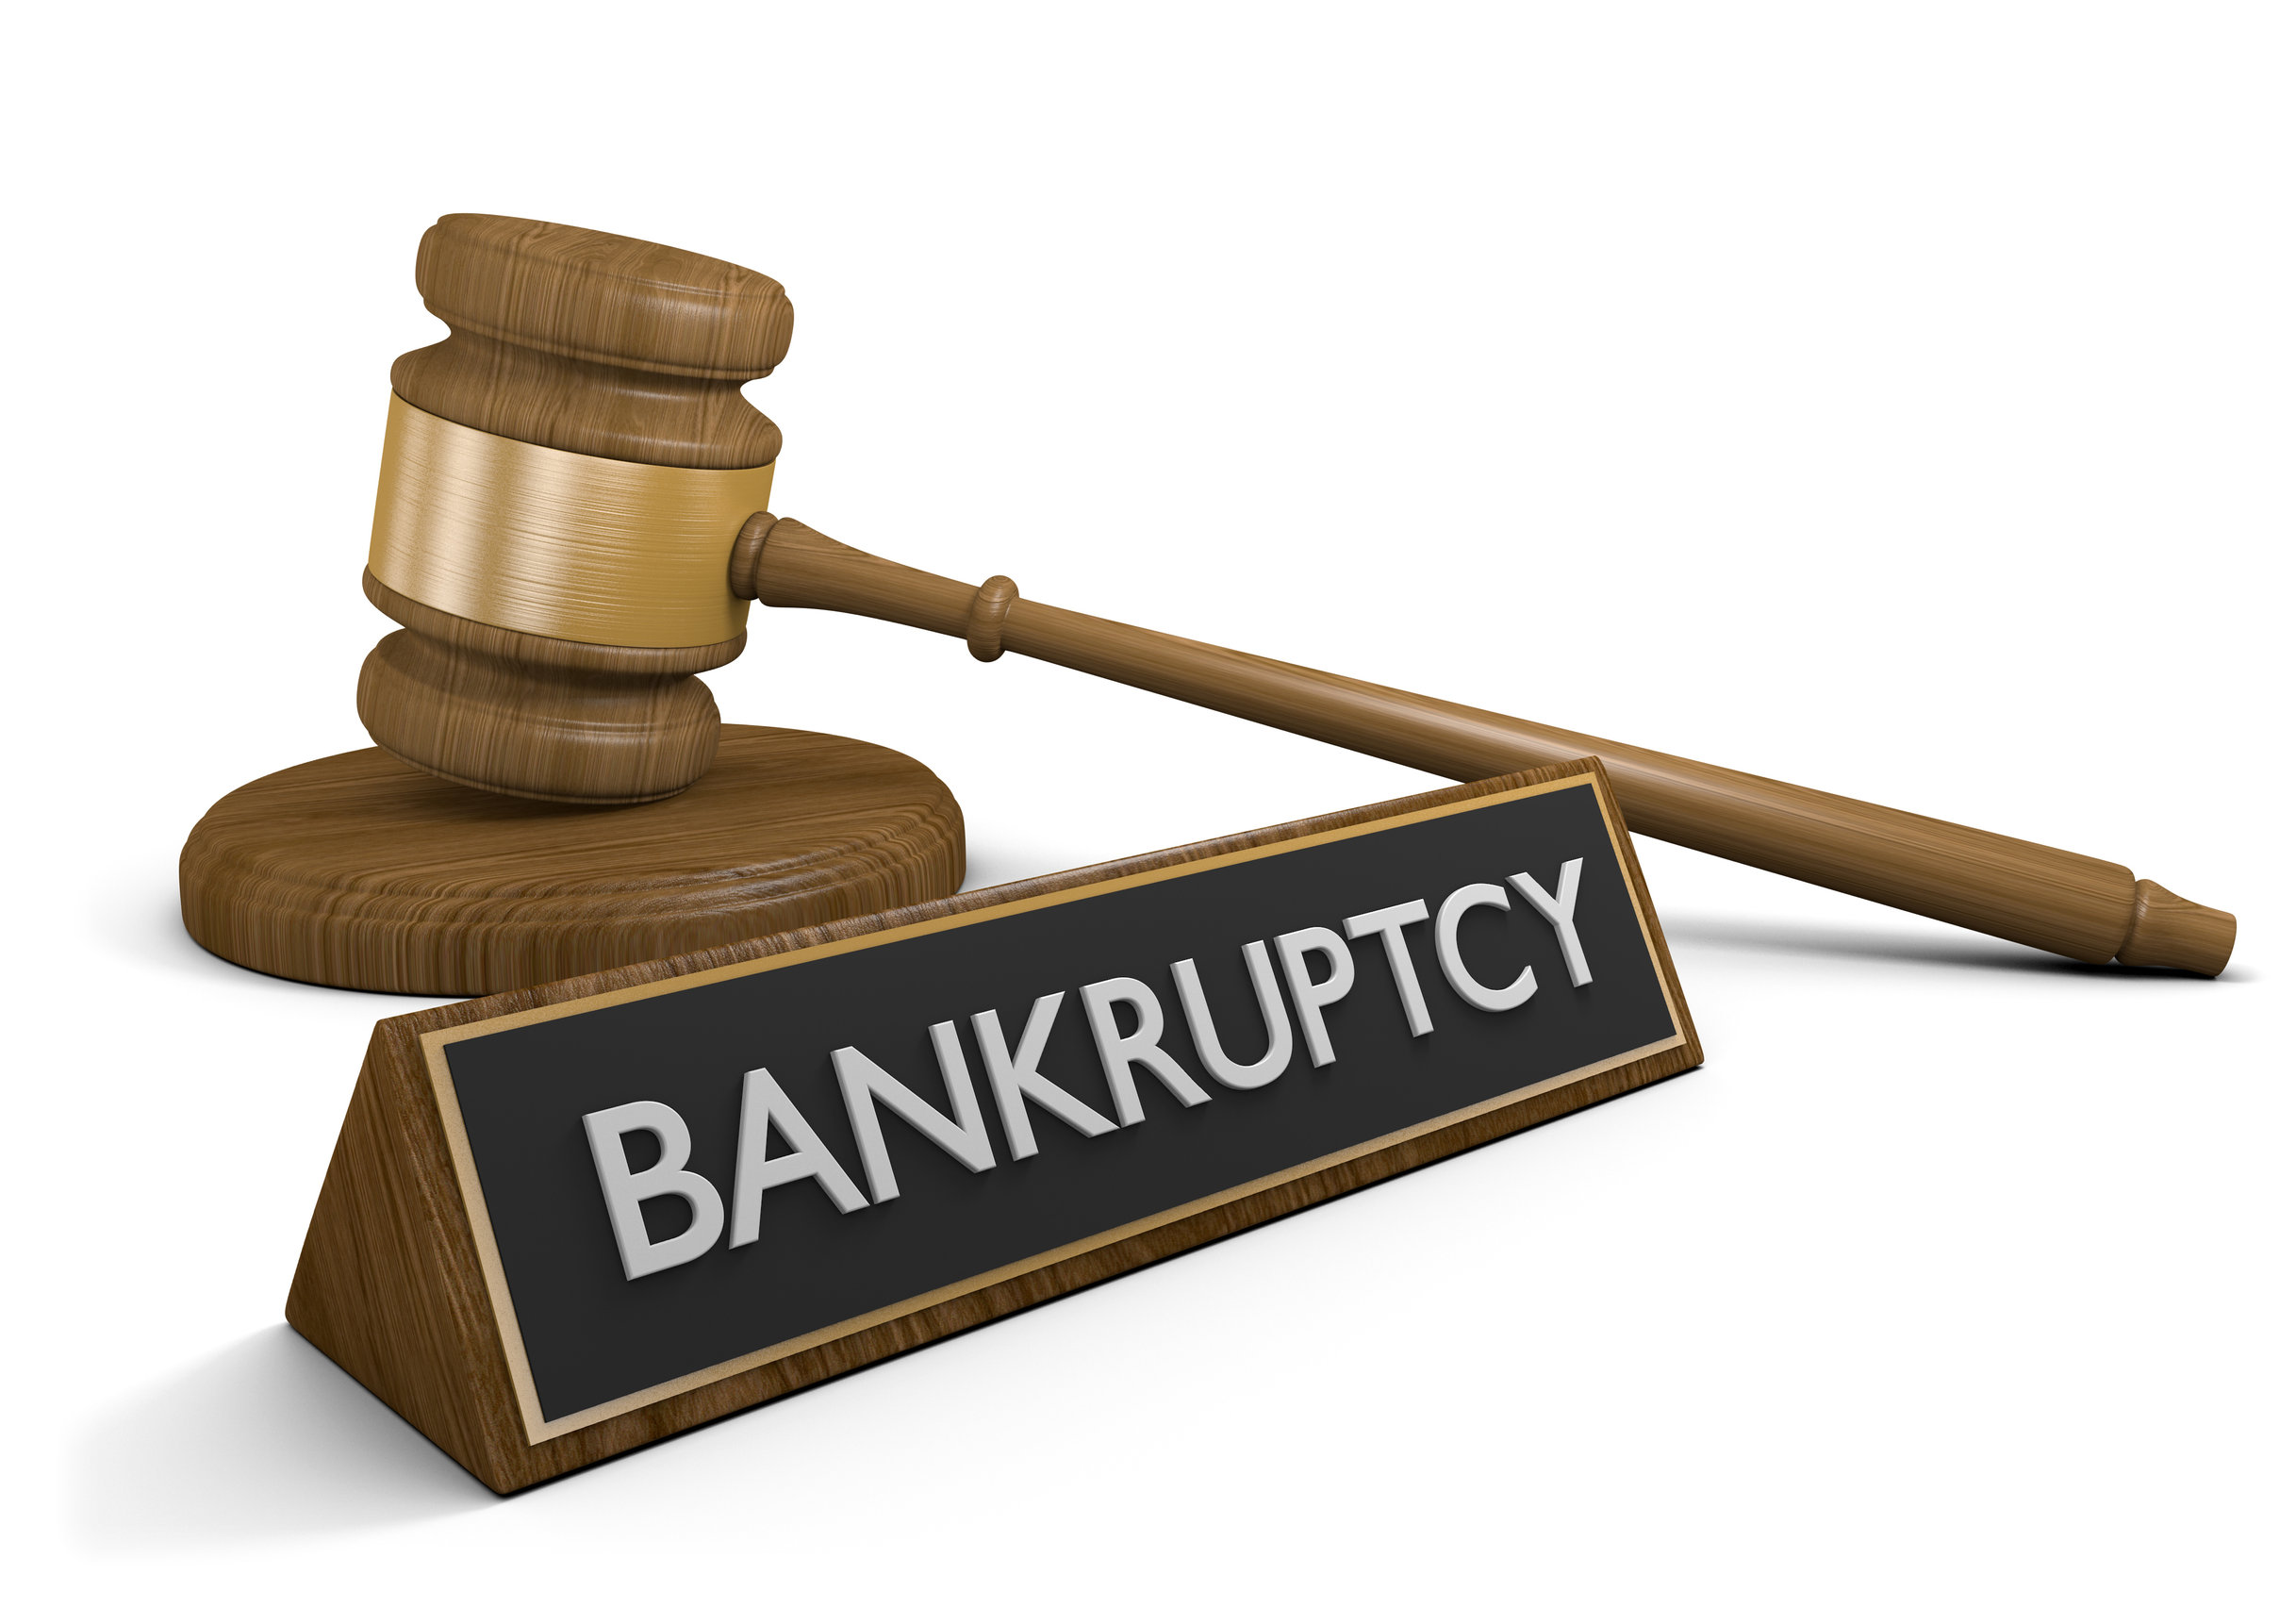 Corporate Bankruptcy and Restructuring: Latest Trends to Watch in 2022